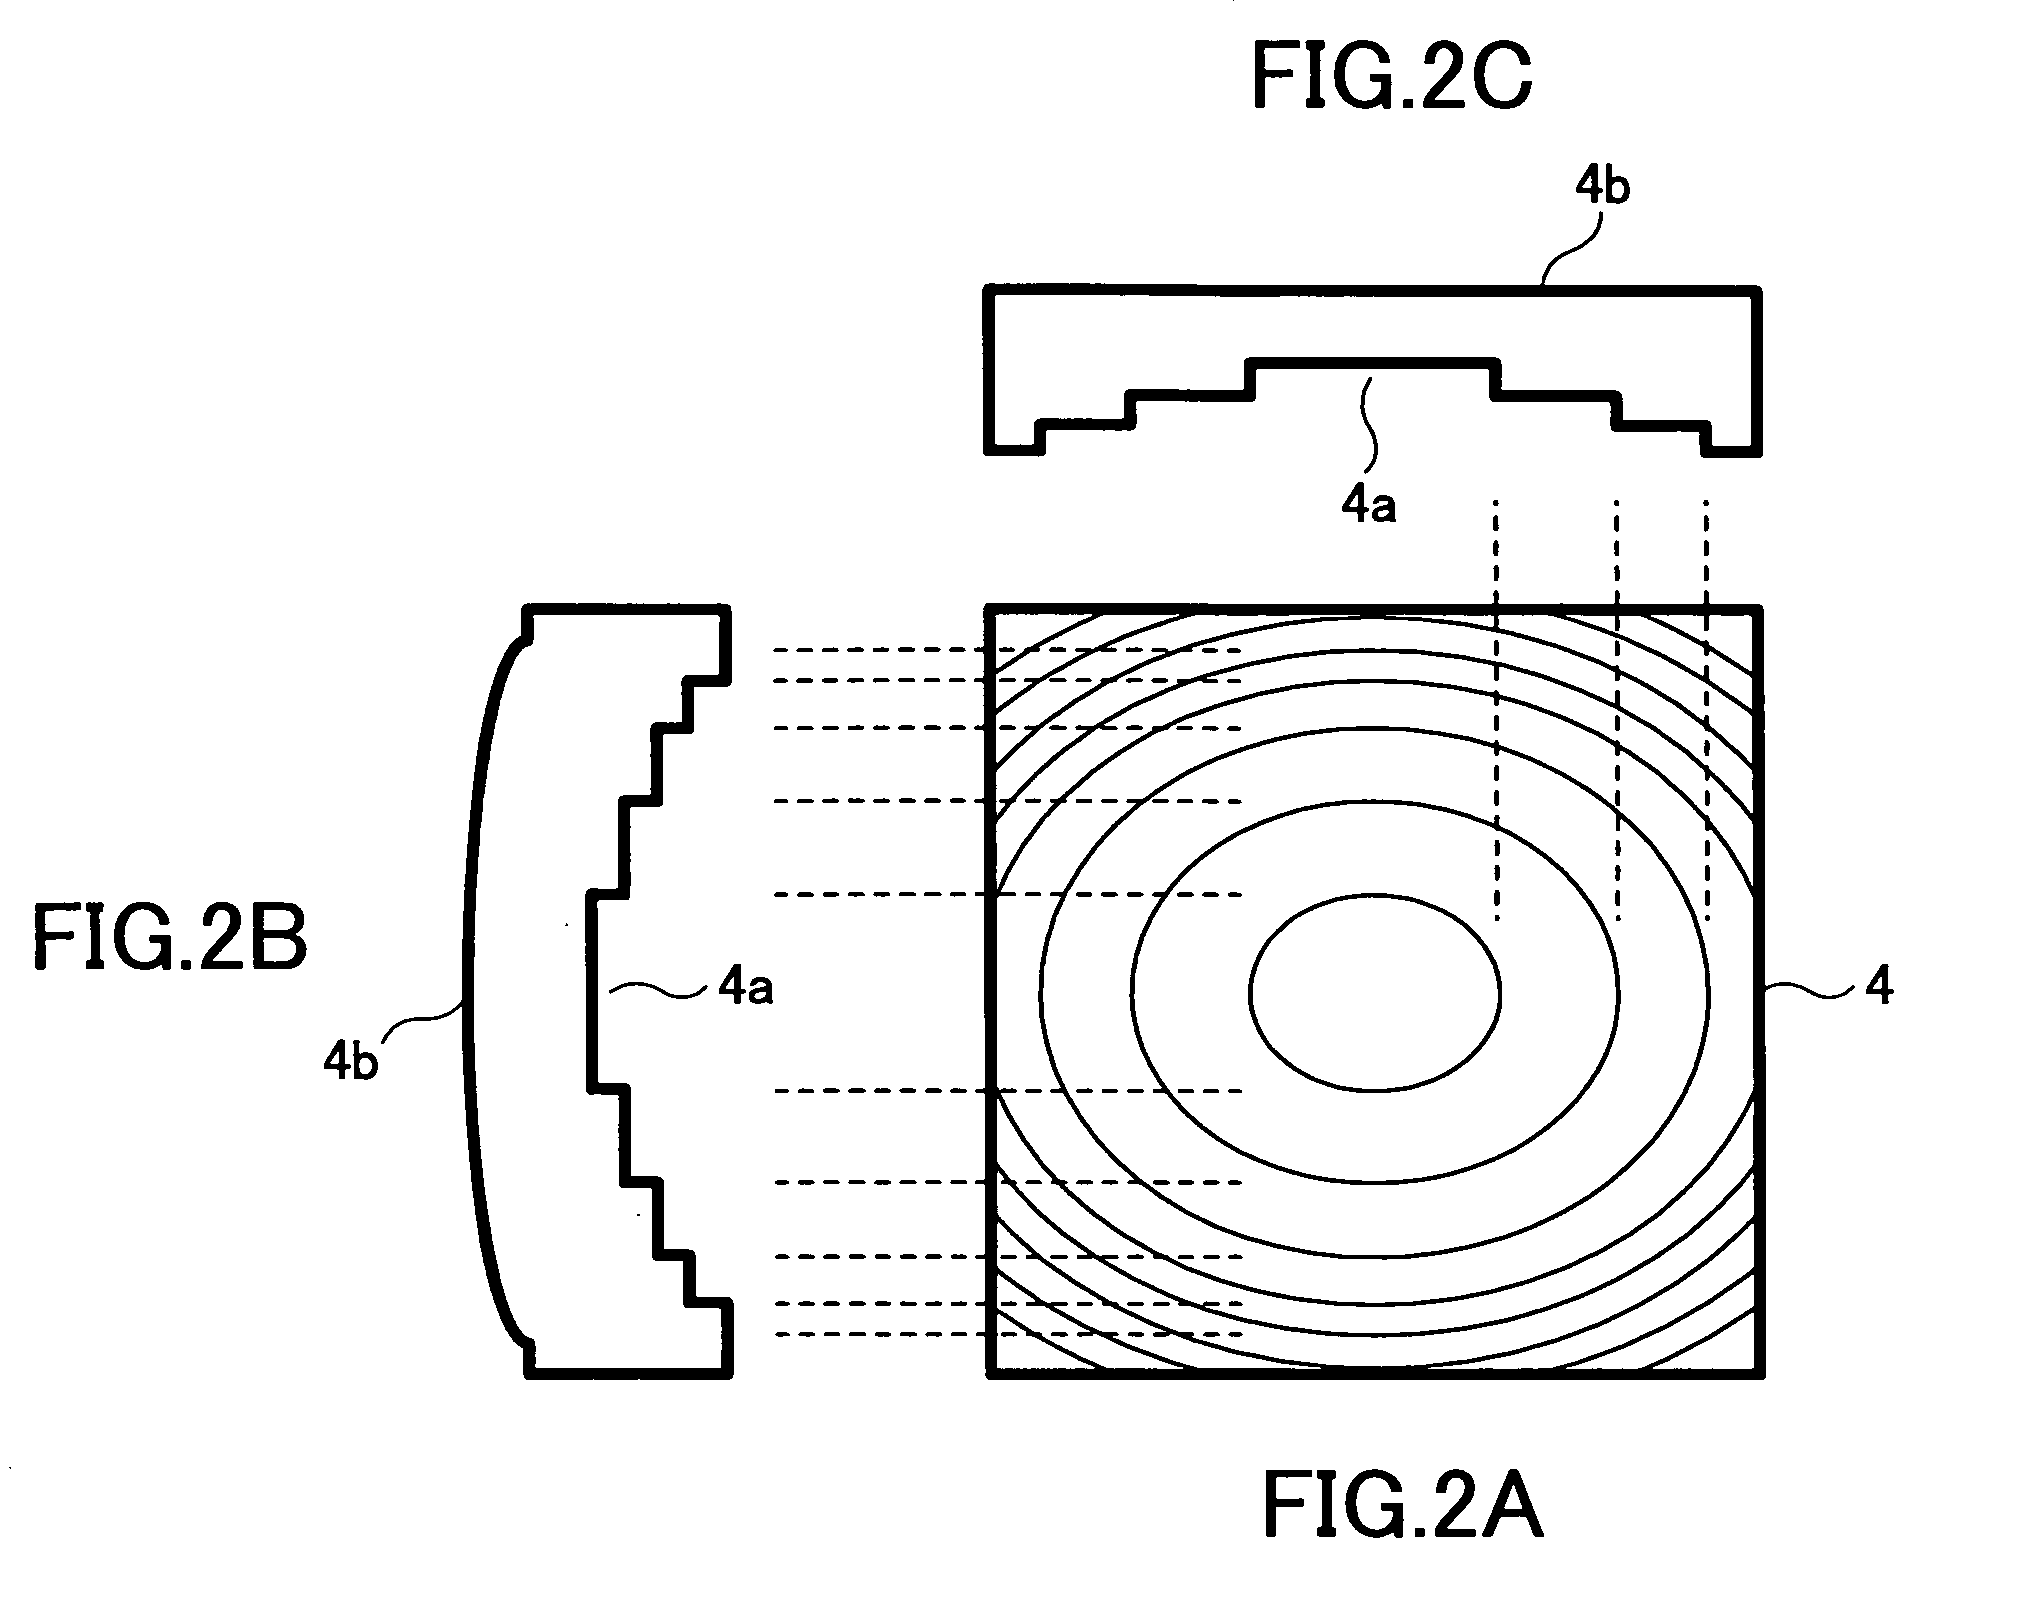 Optical scanning apparatus, and image forming apparatus